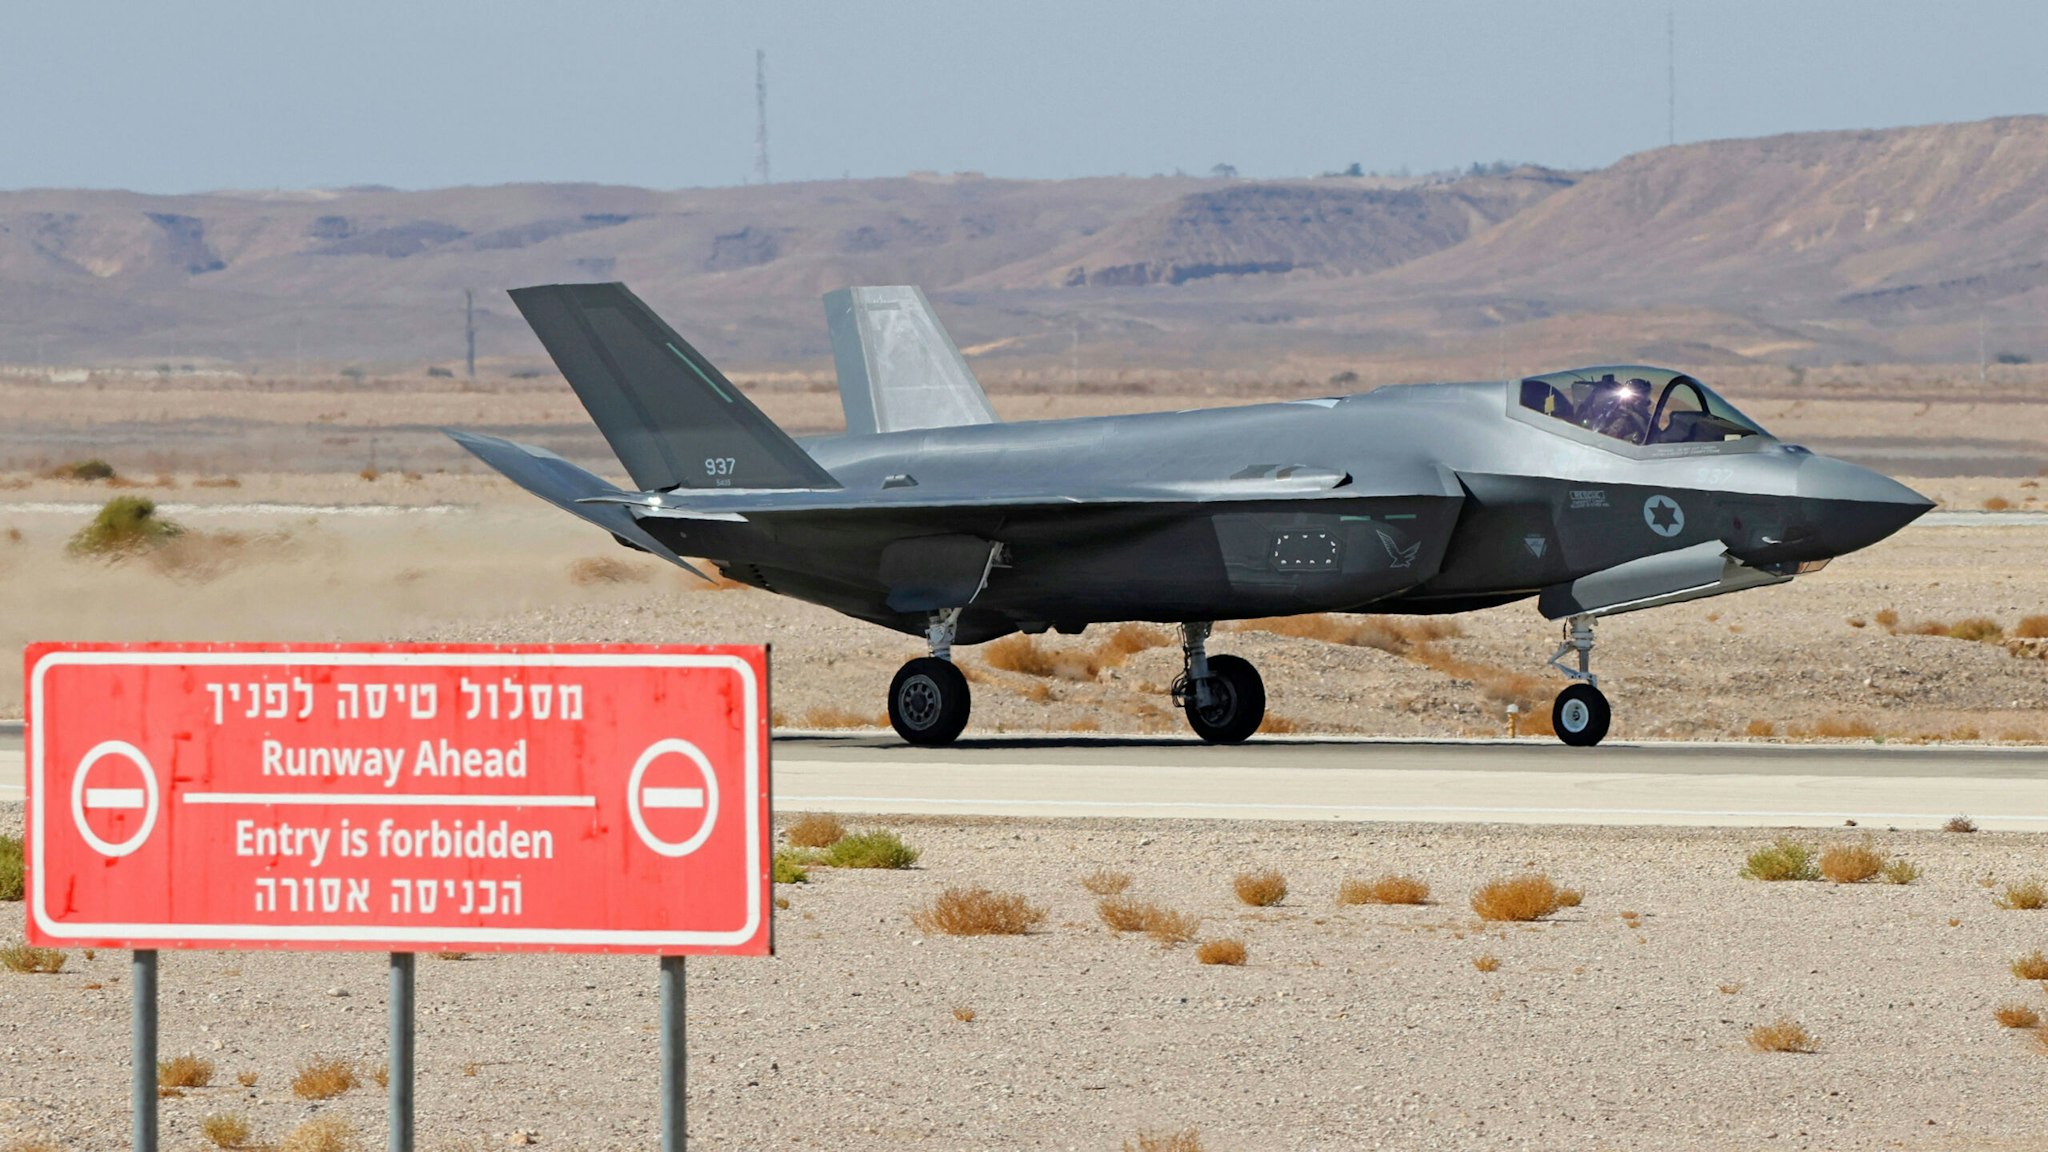 An Israeli air force F-35 fighter lands during the "Blue Flag" multinational air defence exercise at the Ovda air force base, north of the Israeli city of Eilat, on October 24, 2021. - Israel is holding its largest-ever air force exercise this week, joined by several Western countries and India, with the United Arab Emirates air force chief visiting the drills.